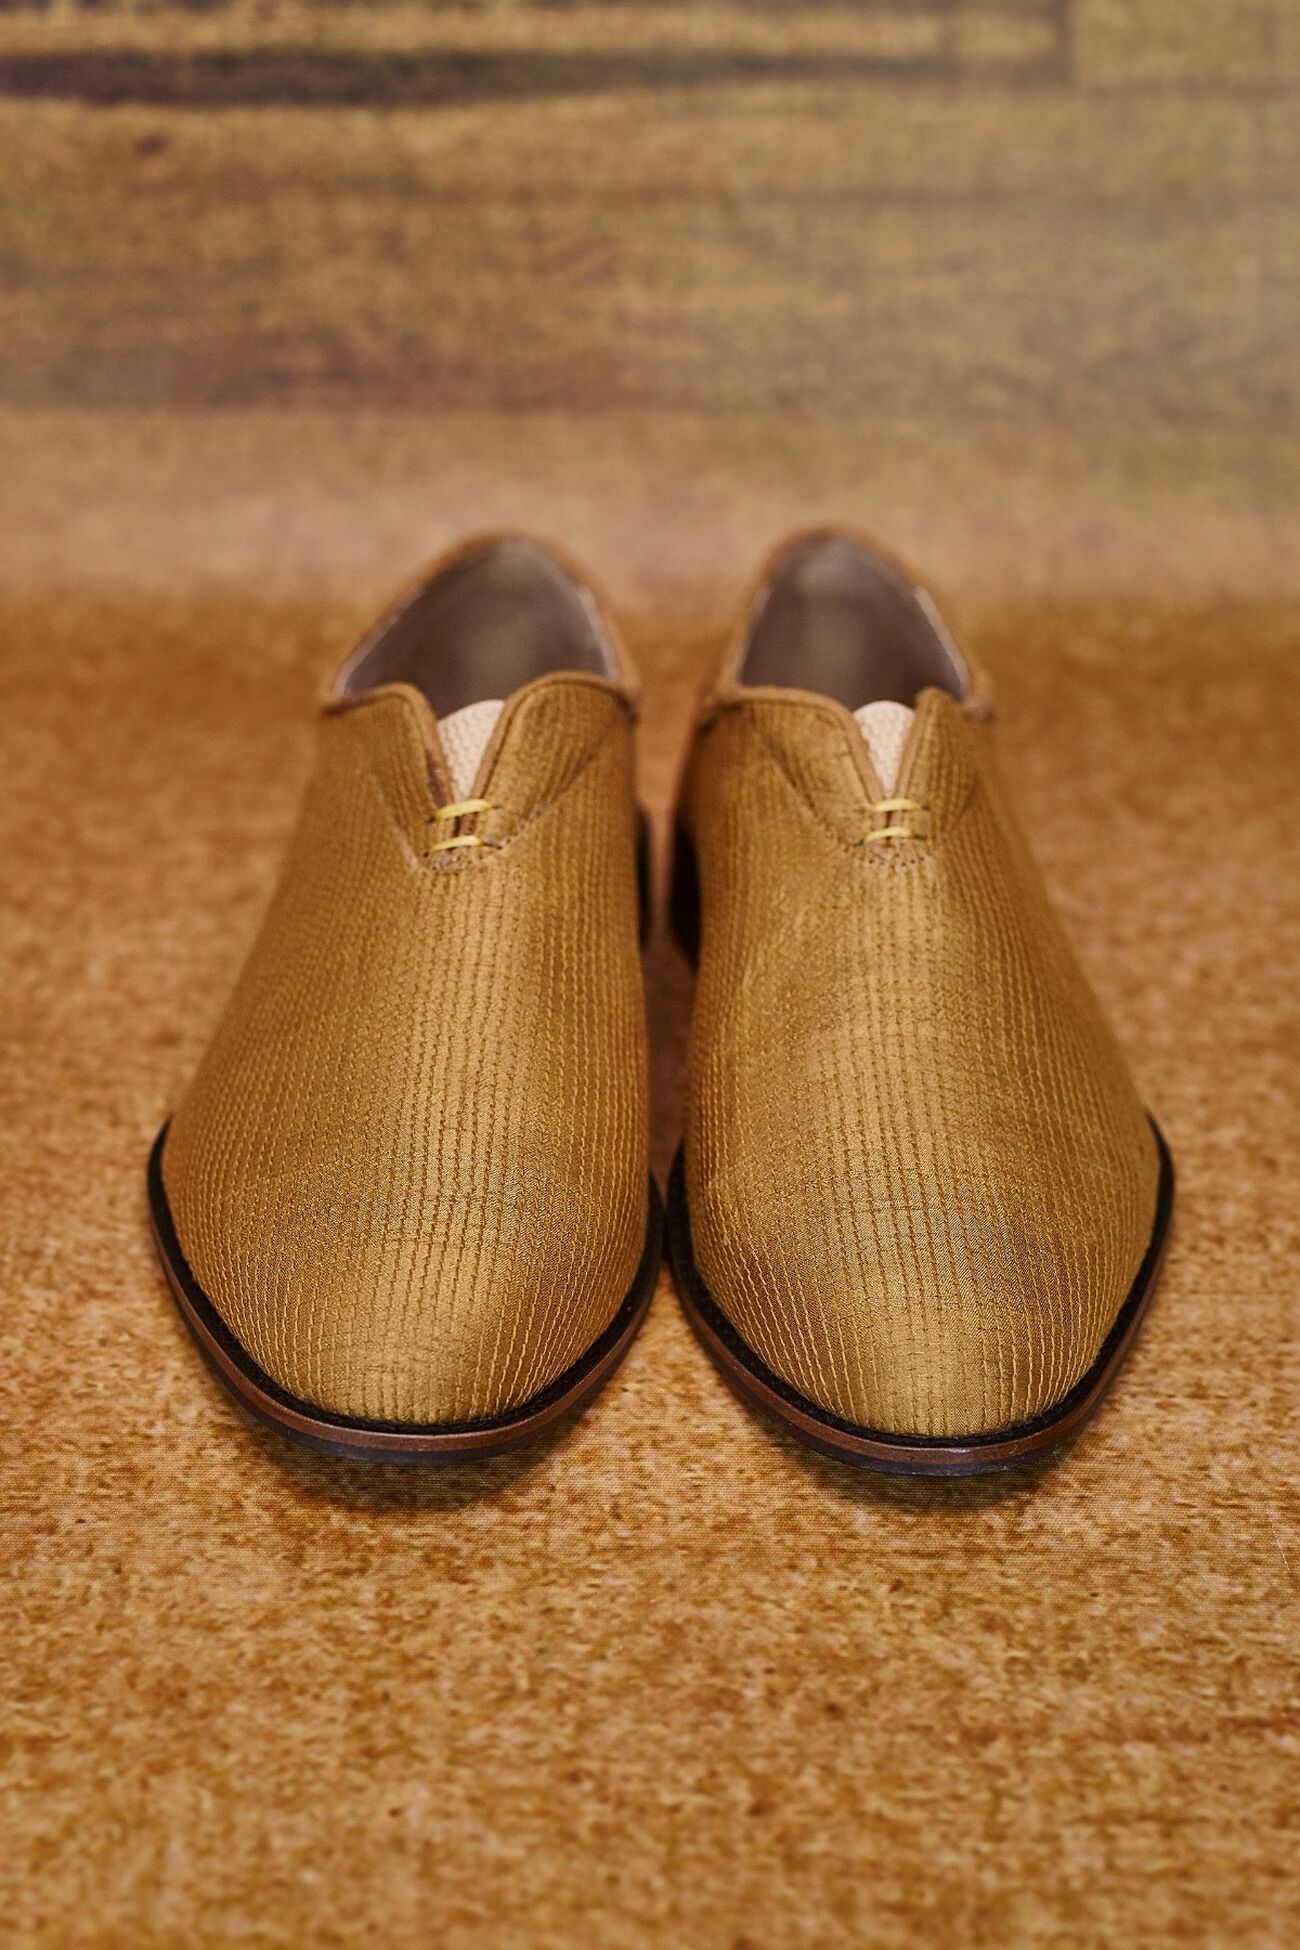 1 - Tanner Shoes, image 1